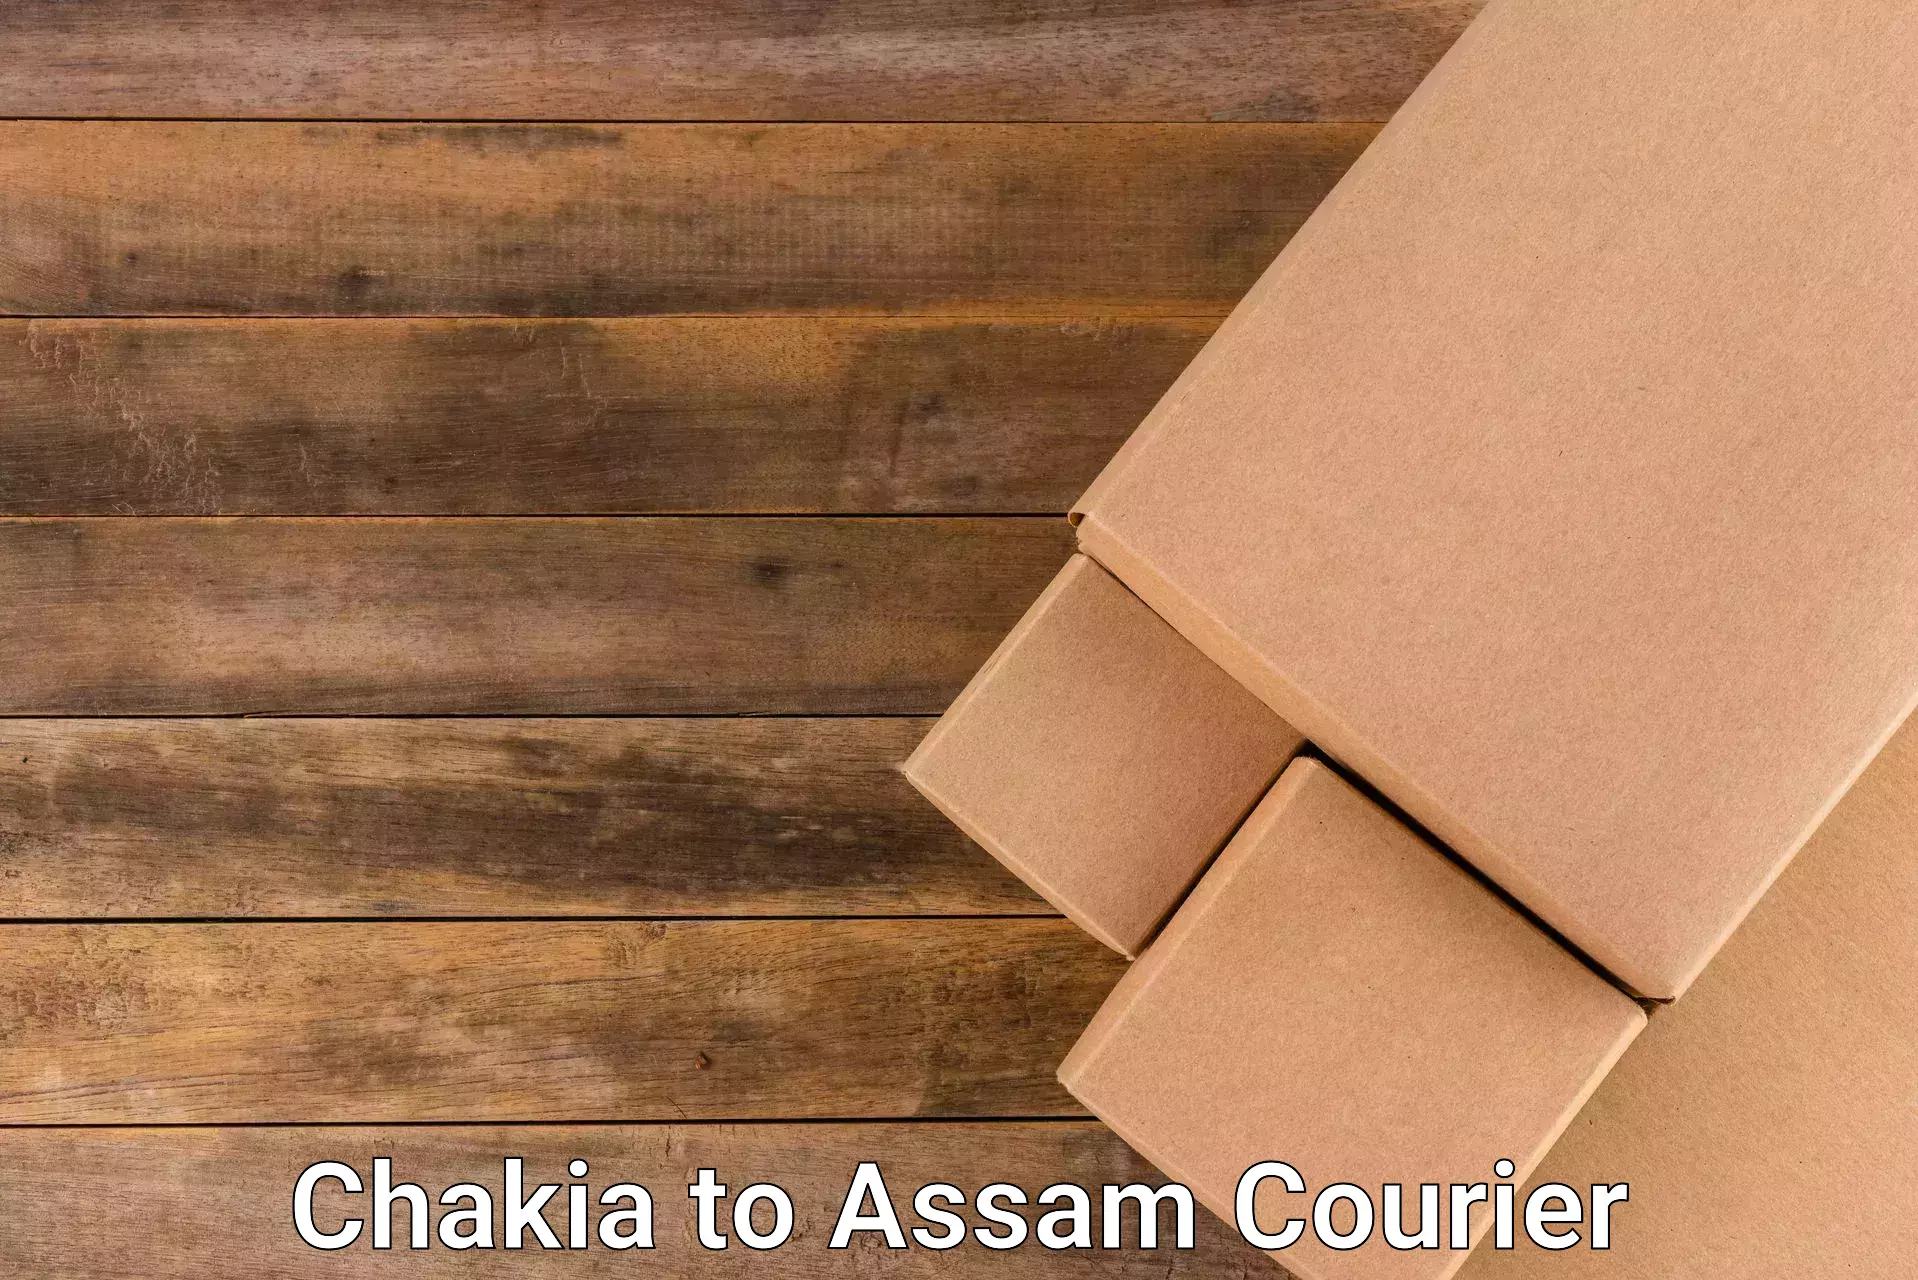 Overnight delivery services Chakia to Assam